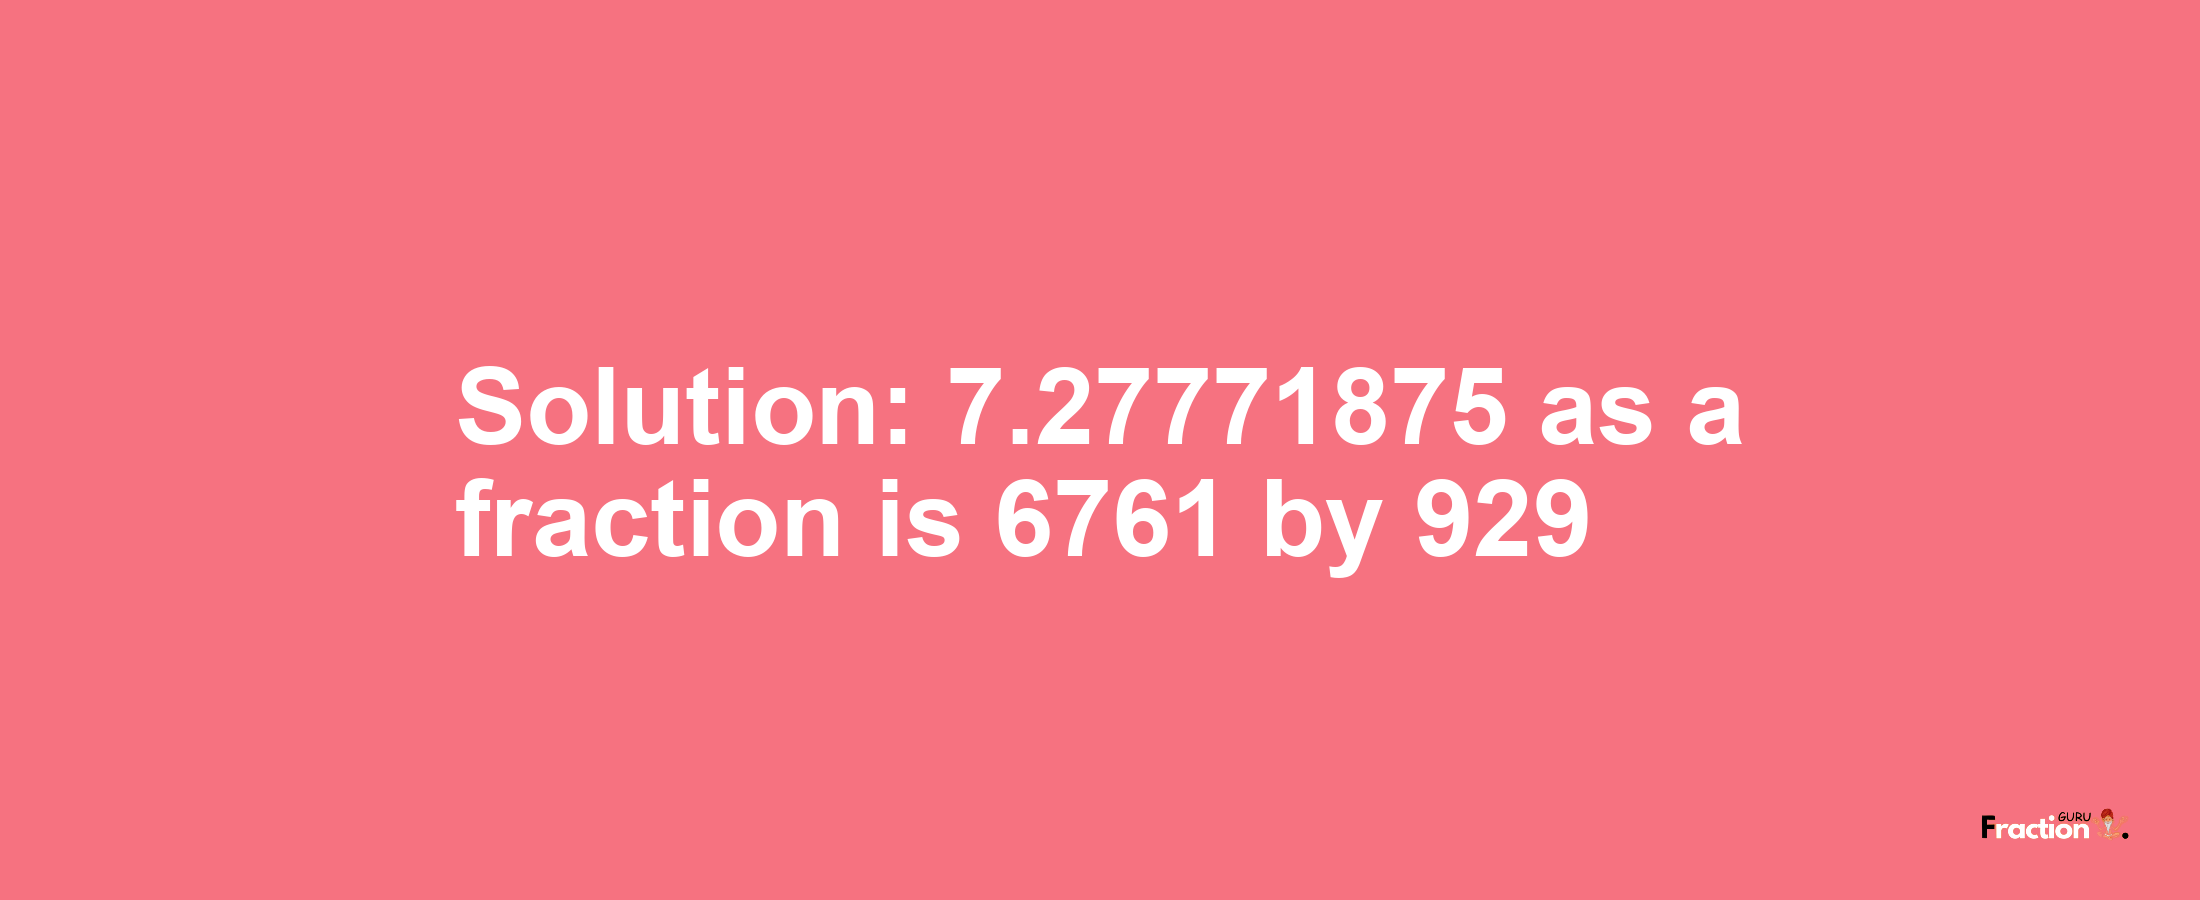 Solution:7.27771875 as a fraction is 6761/929